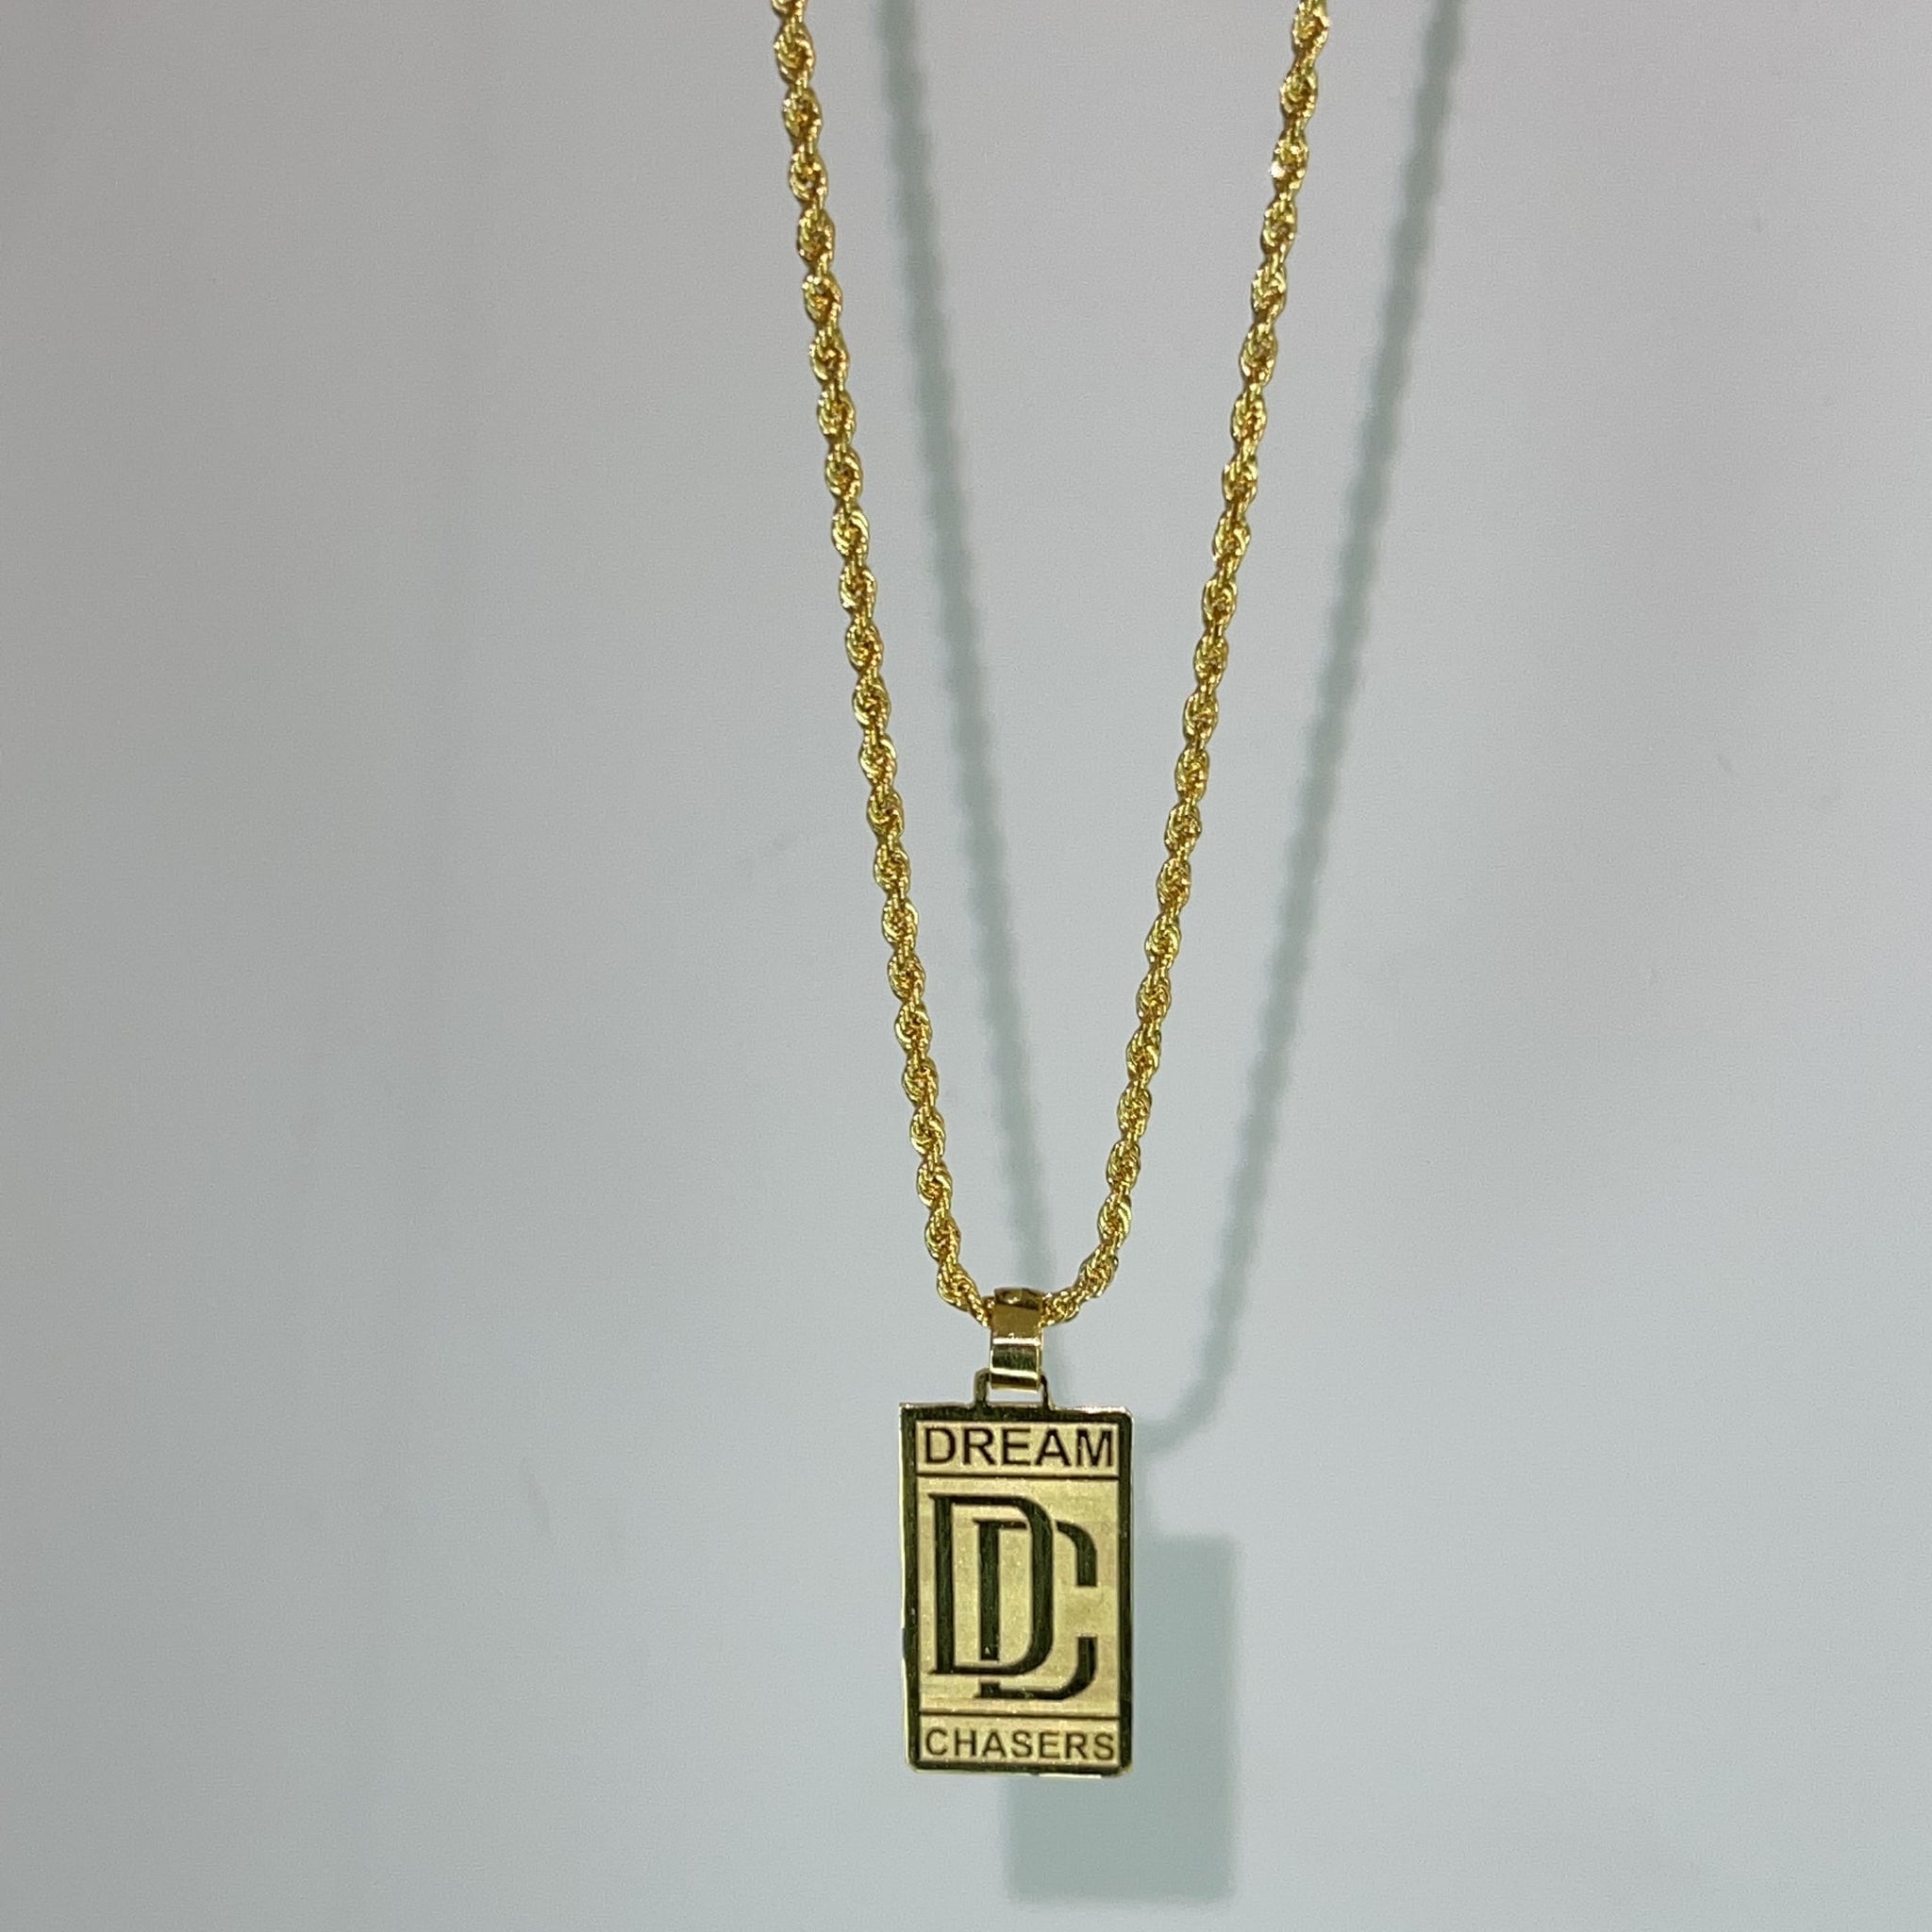 Rope chain + Dream Chasers pendant - 14 carat gold - 60cm / 2.2mm